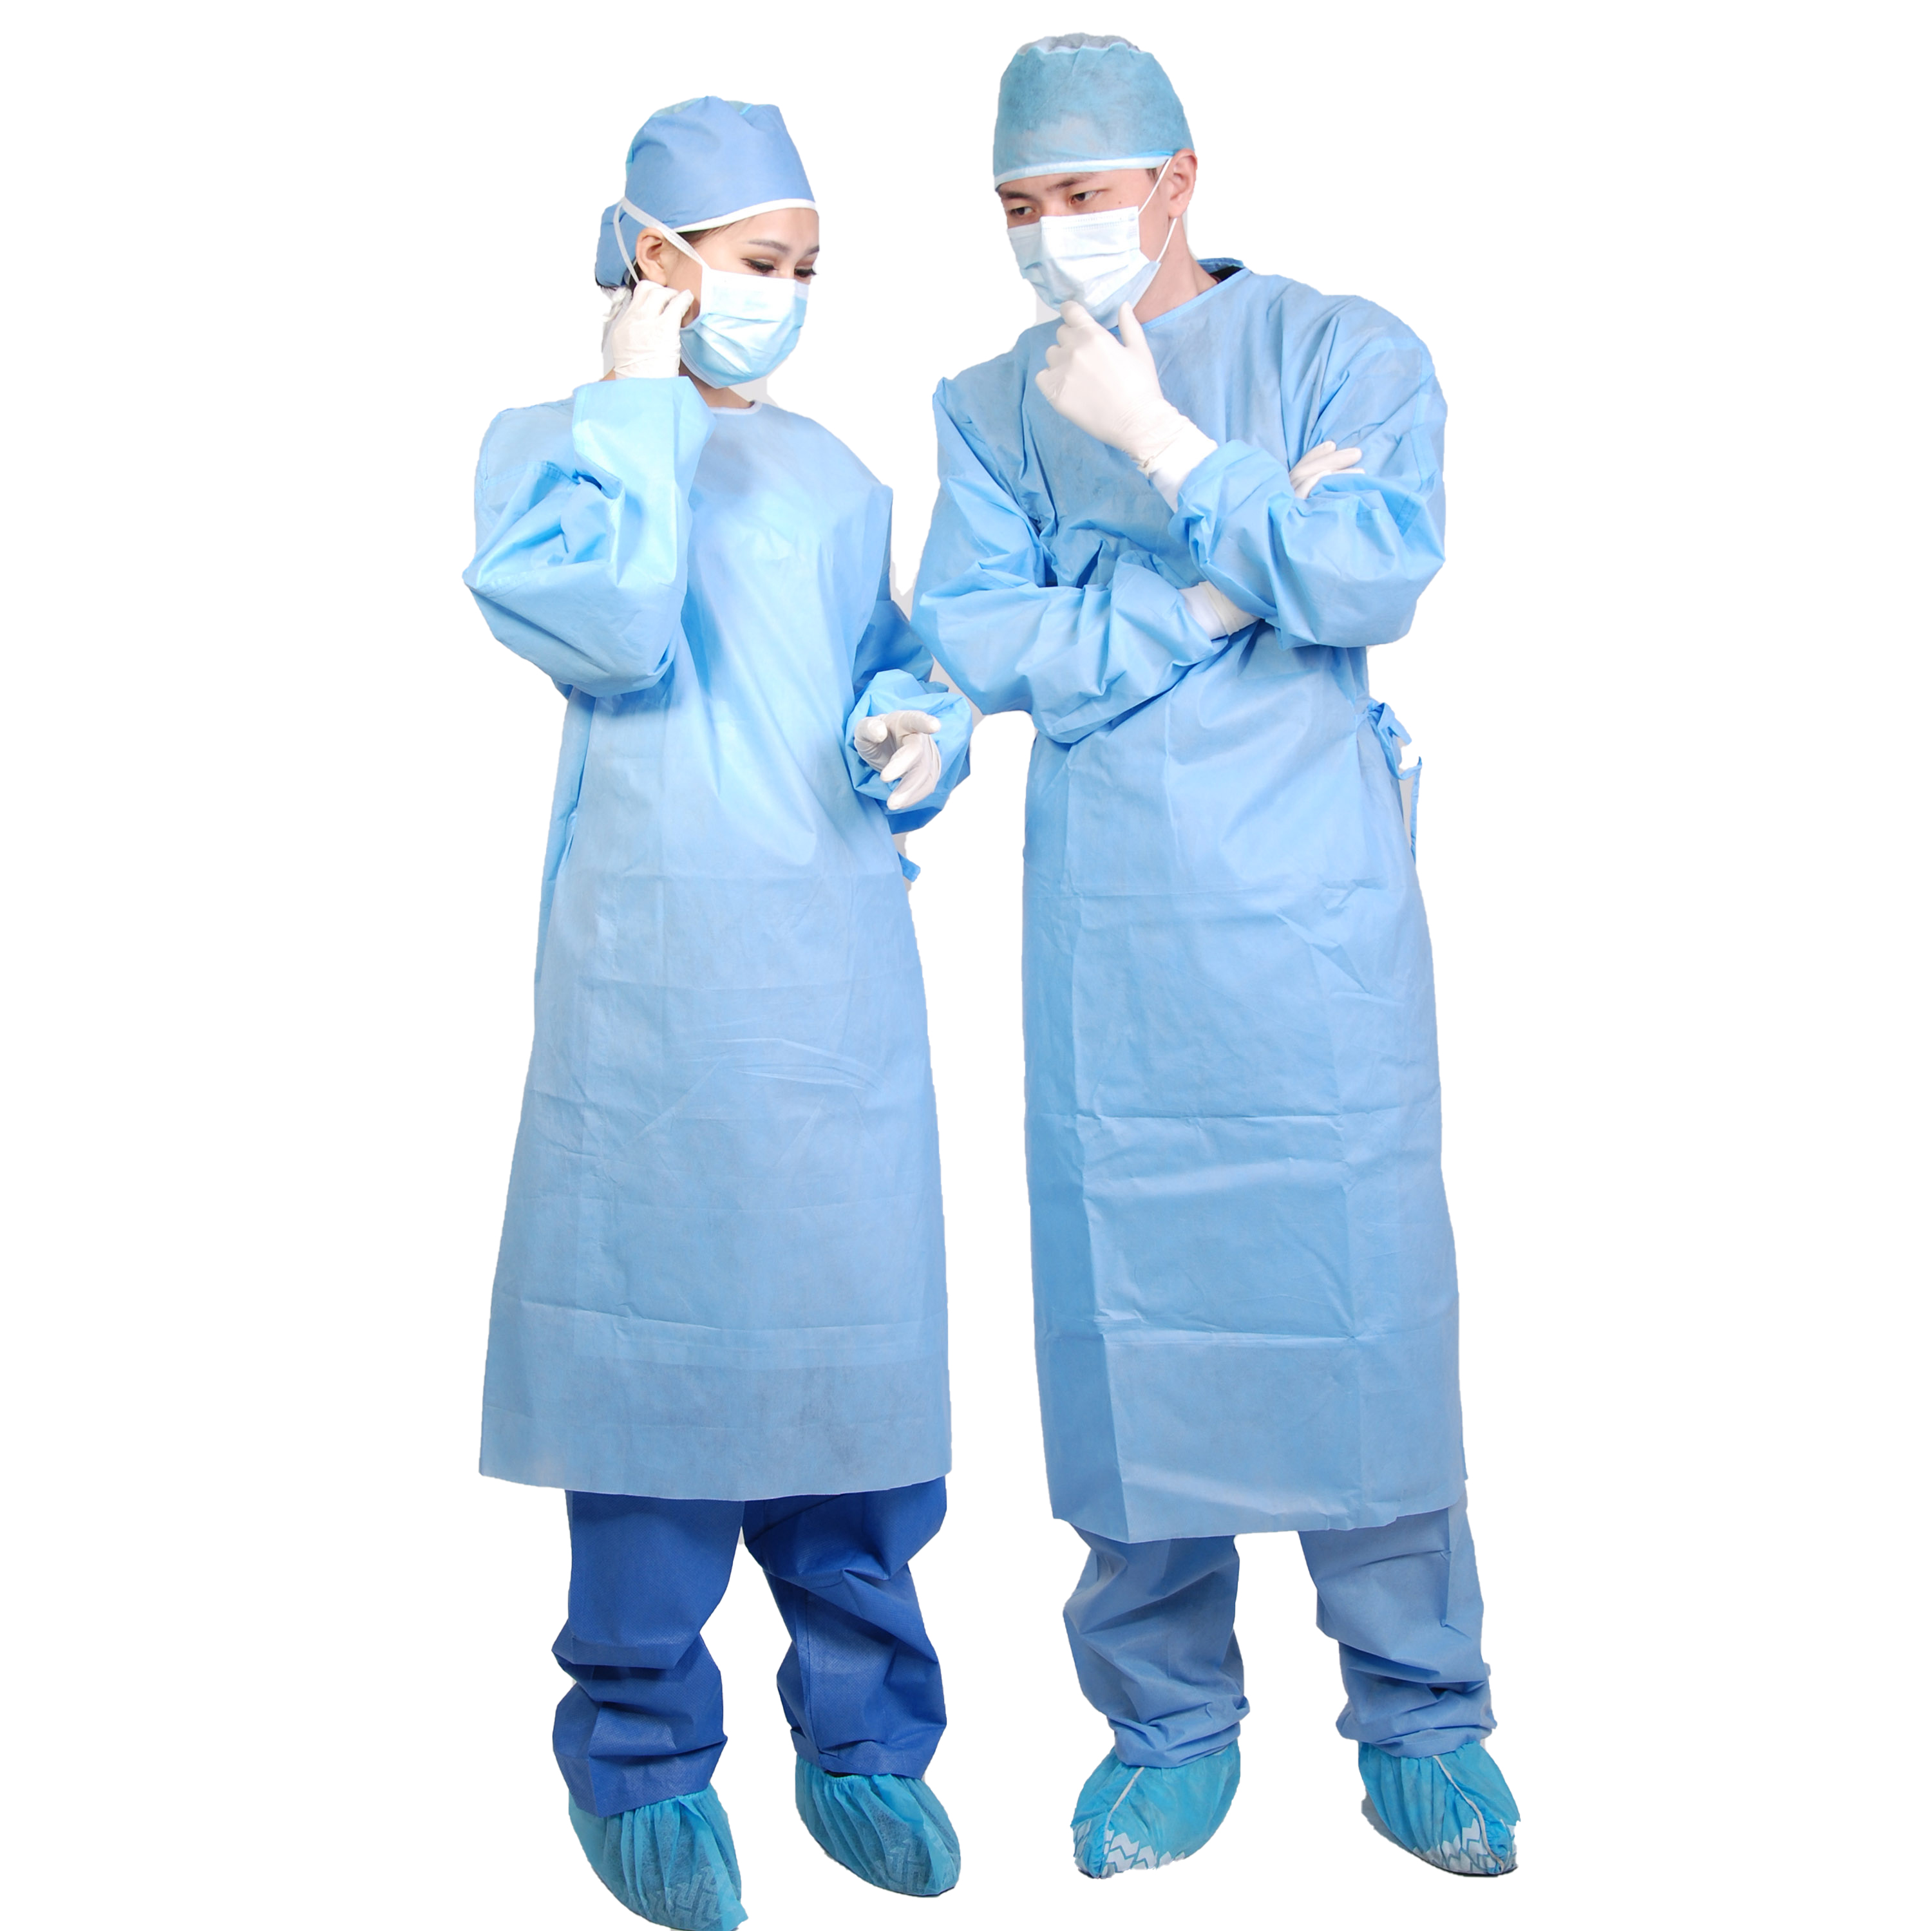 EO Sterile SMS Standard Or Reinforced Surgical Gown